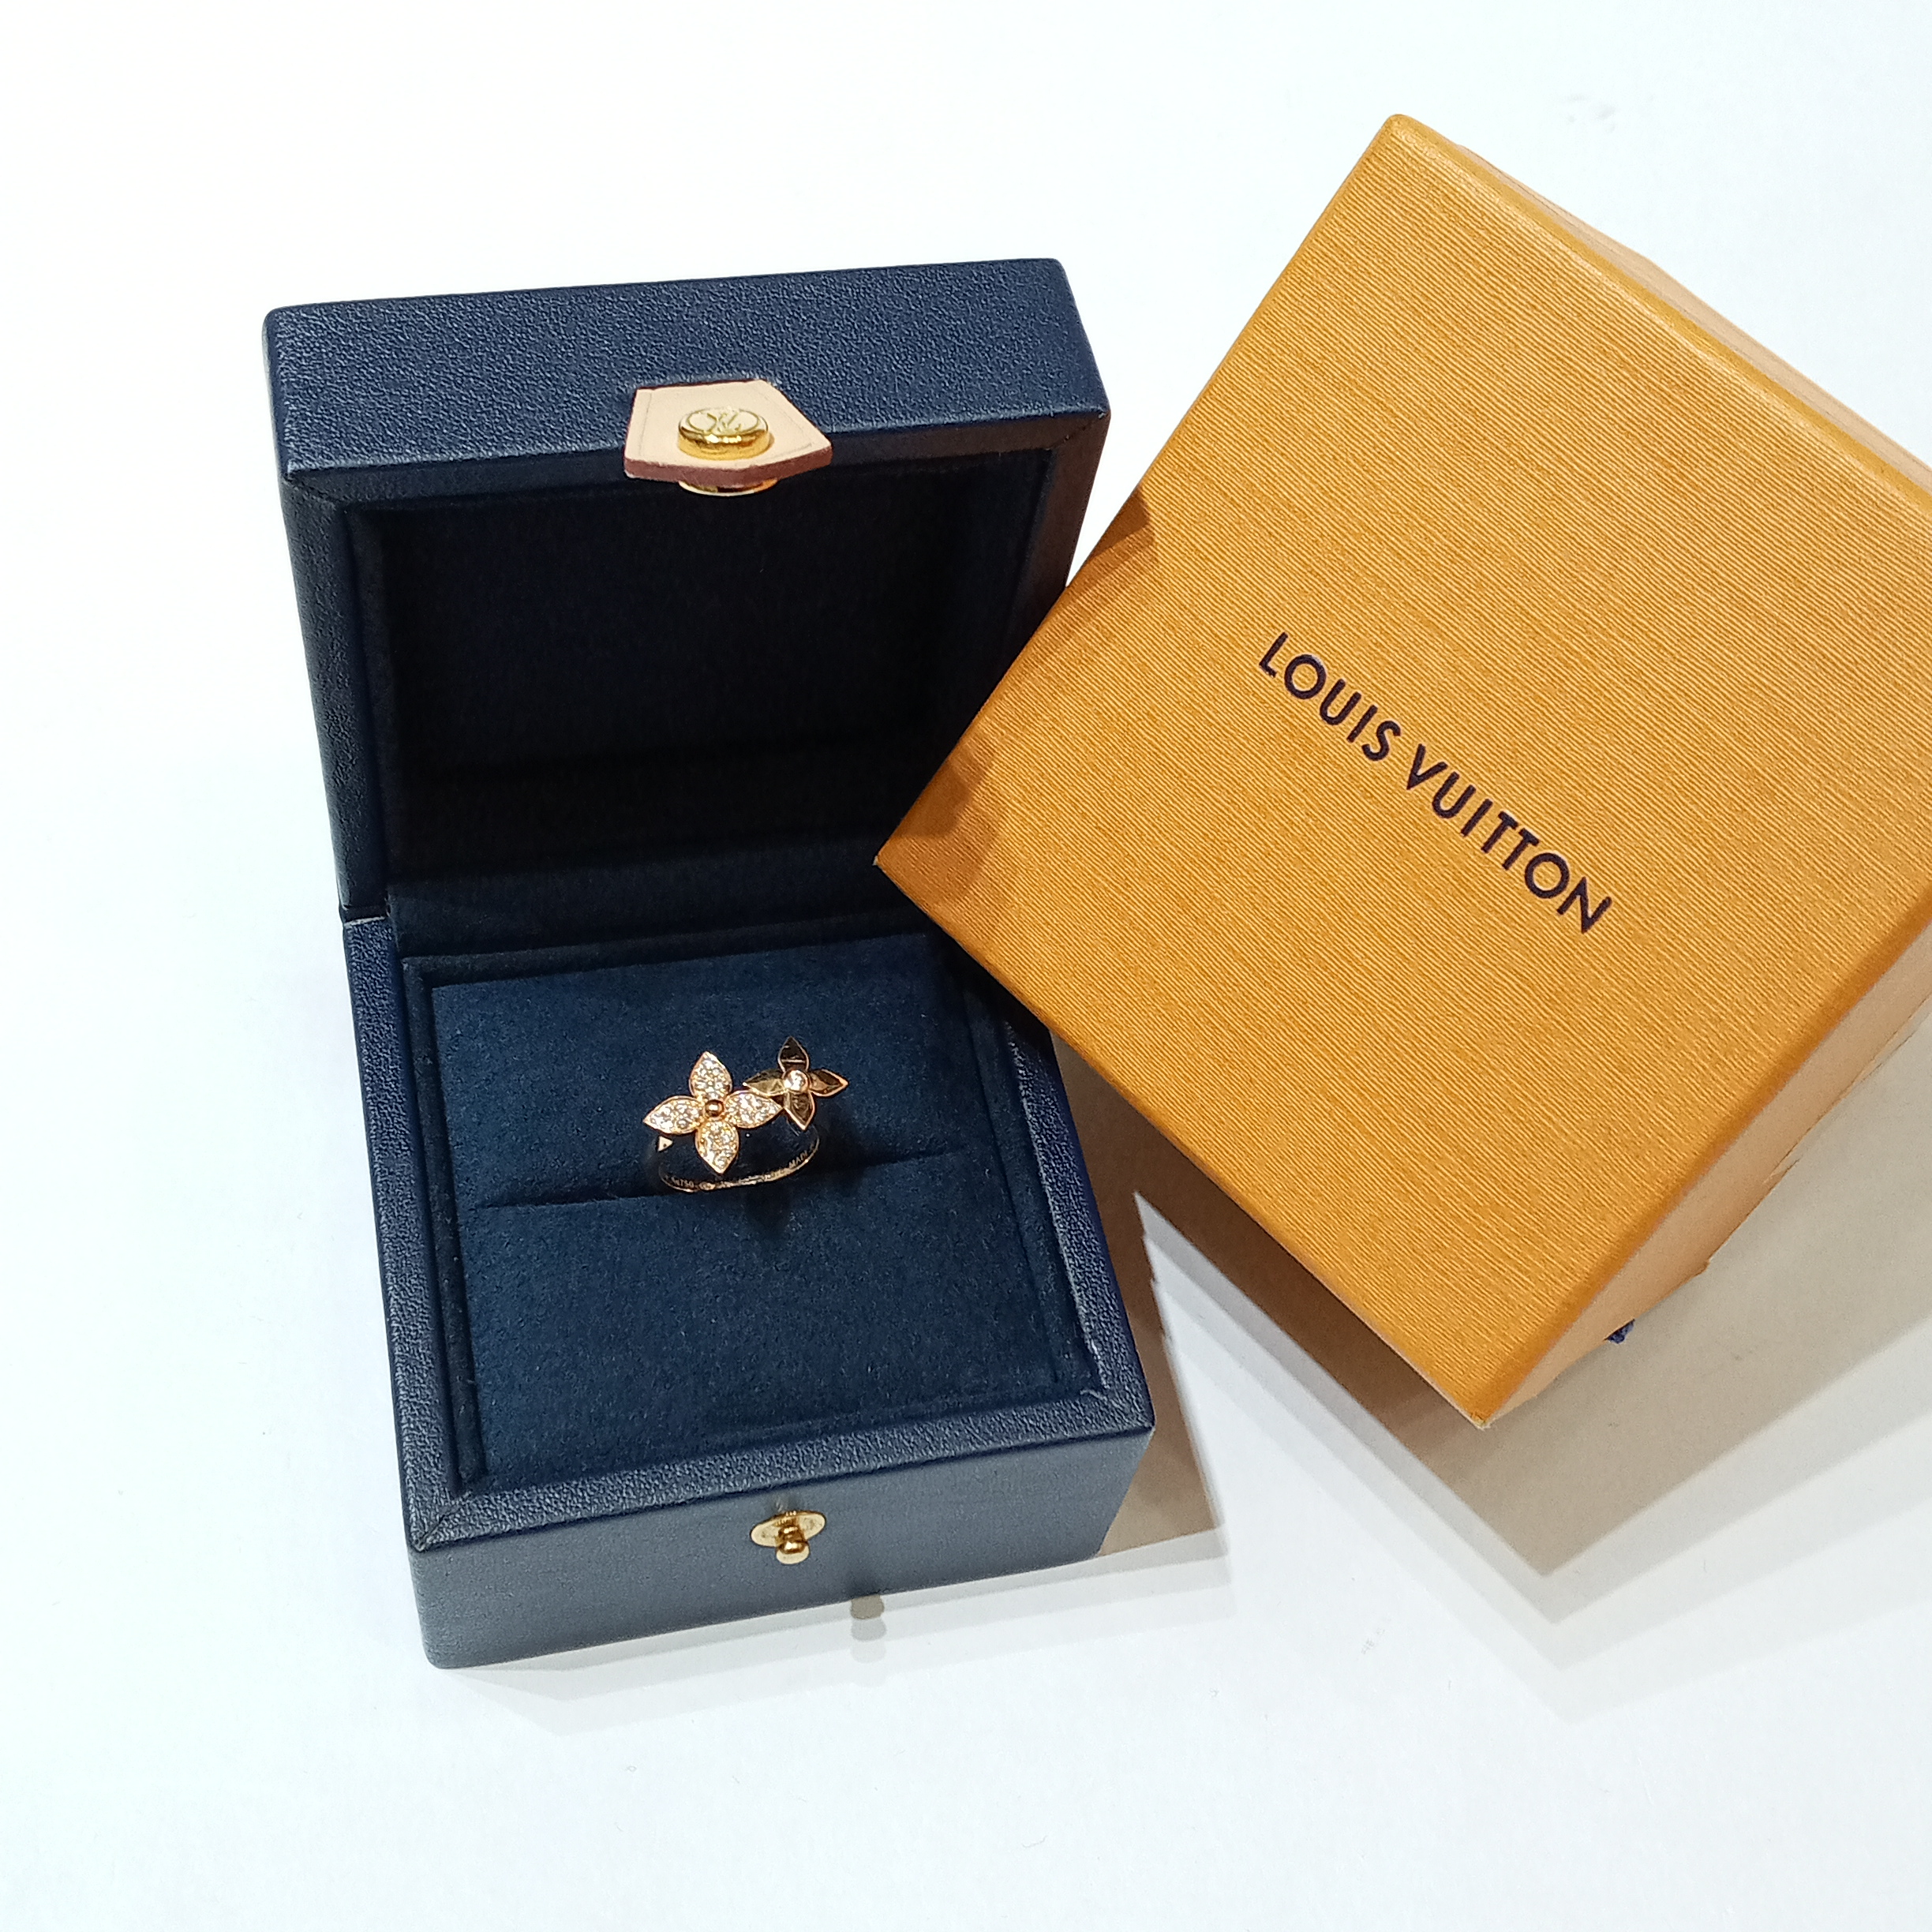 Louis Vuitton Star Blossom Ring Pink Gold And Diamonds (Q9L25A)